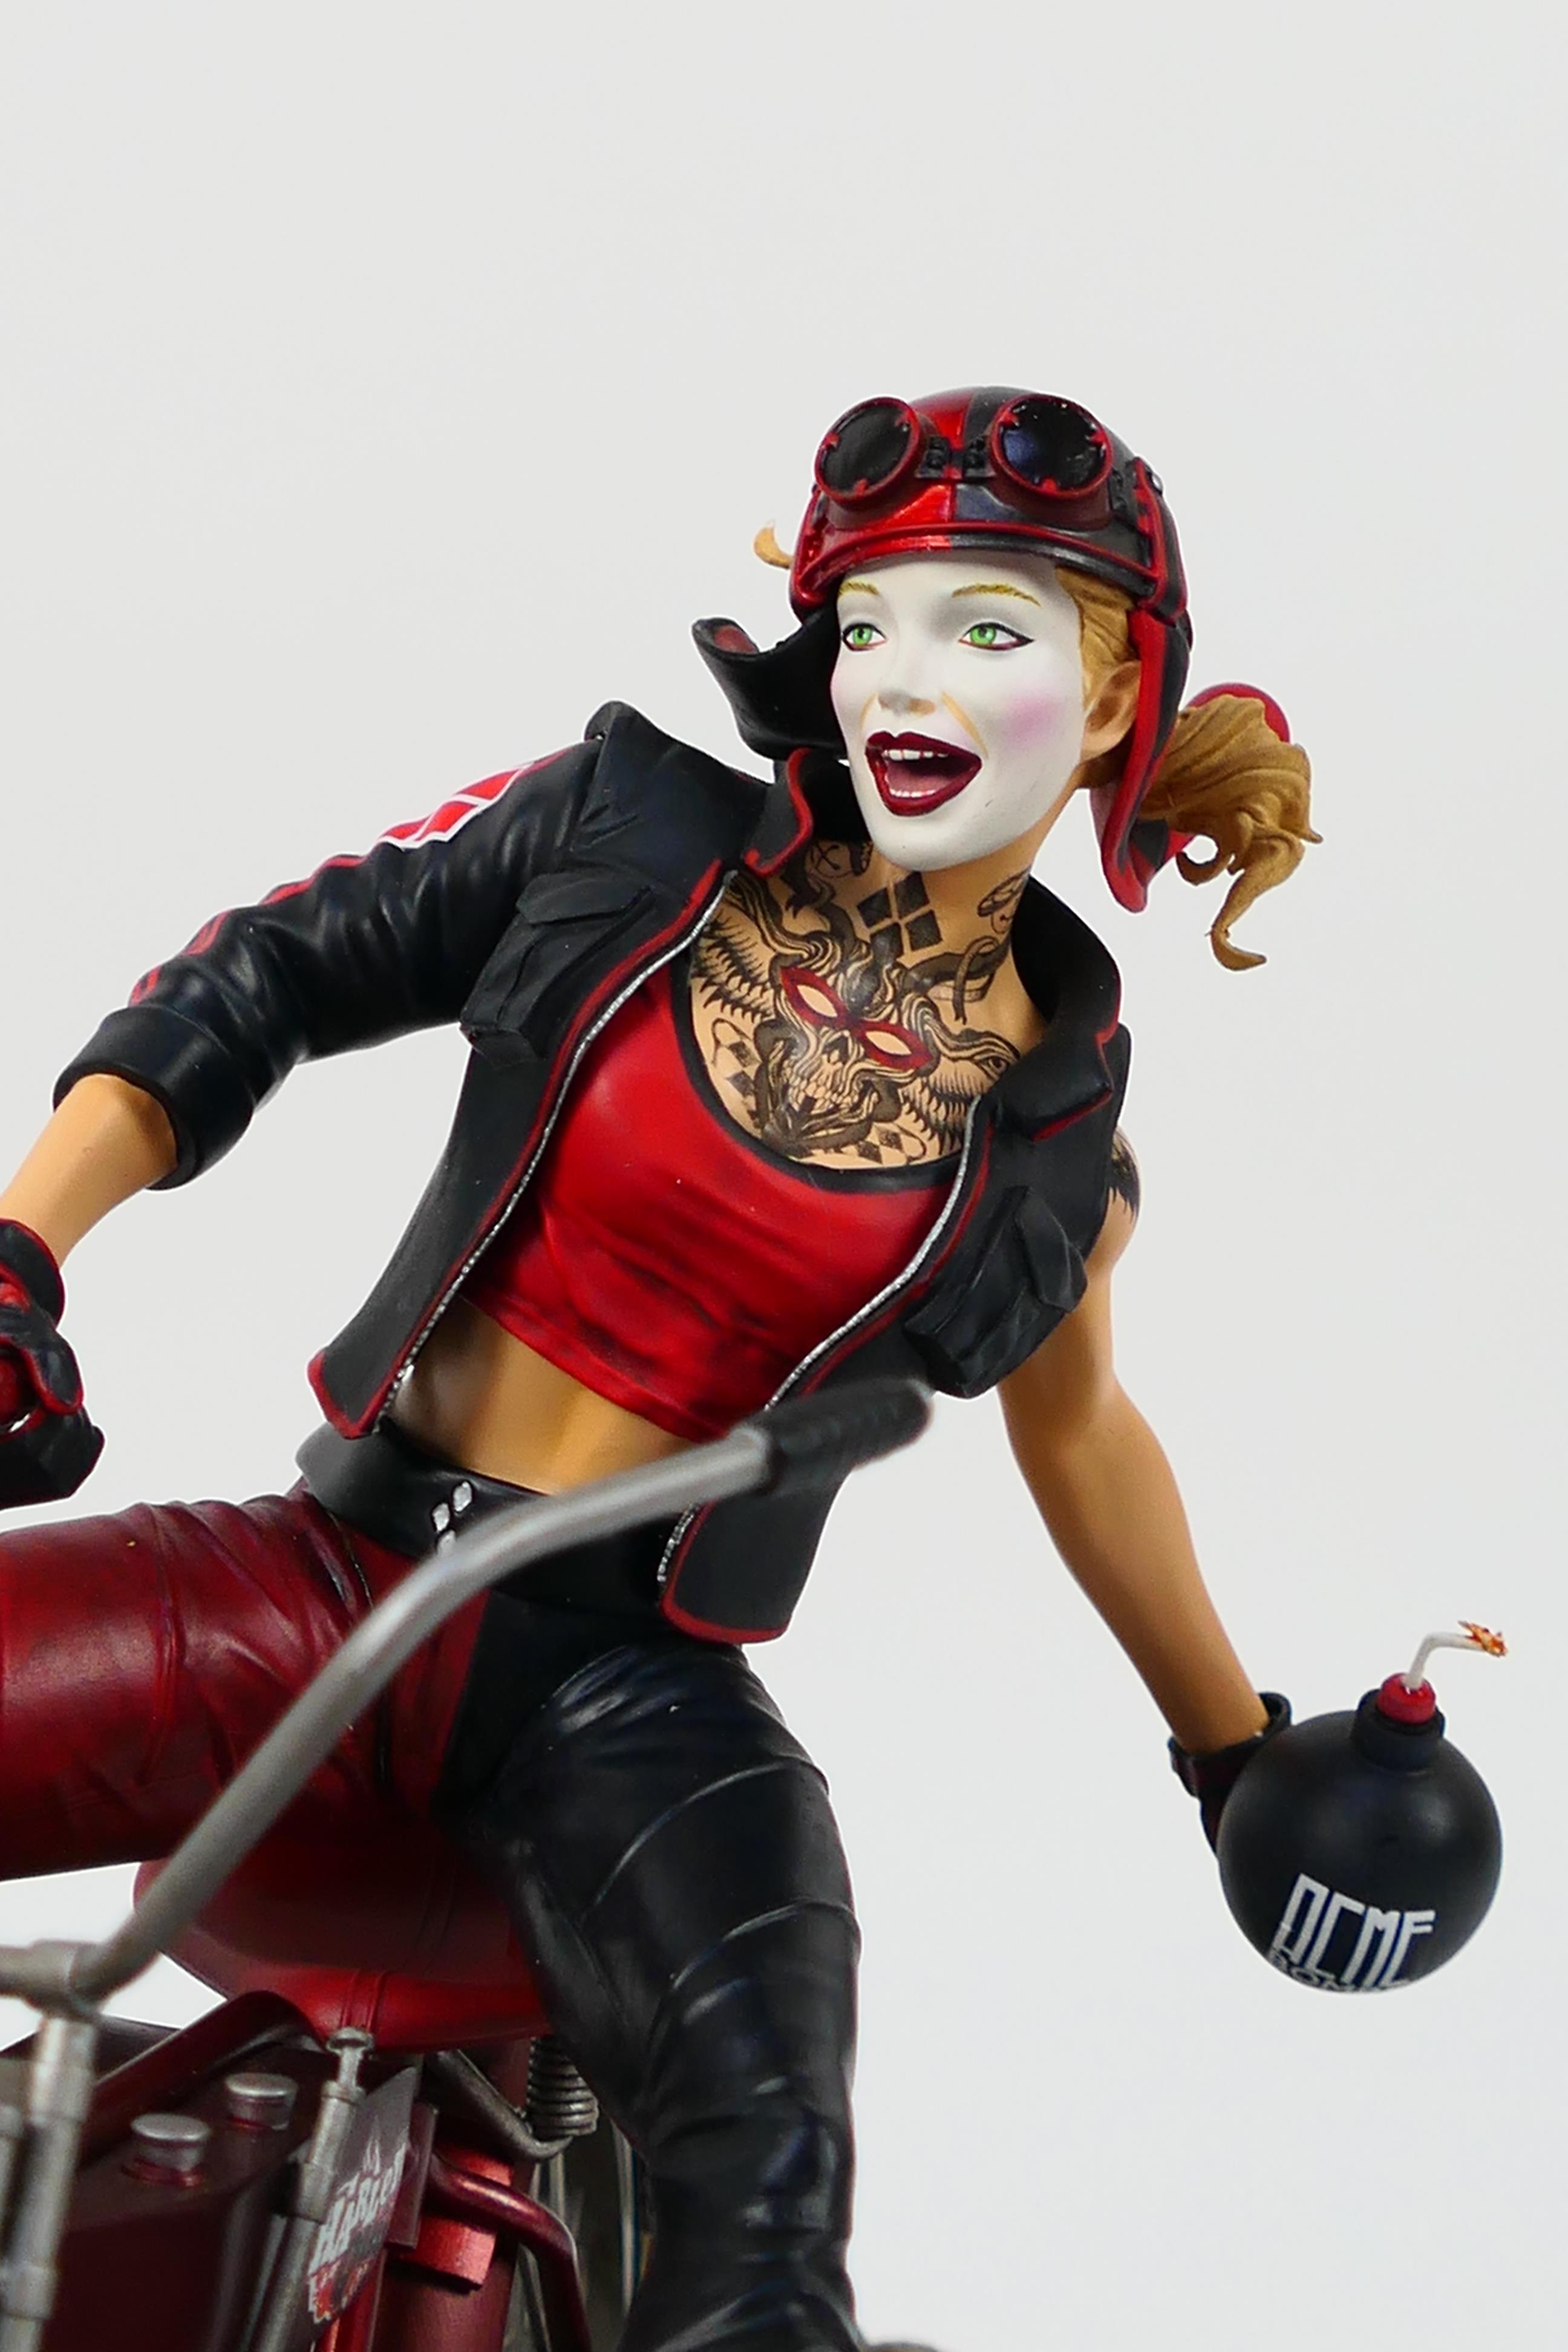 DC Collectibles - Harley Quinn - A limited edition Gotham City Garage Harley Quinn on motorcycle - Image 4 of 8